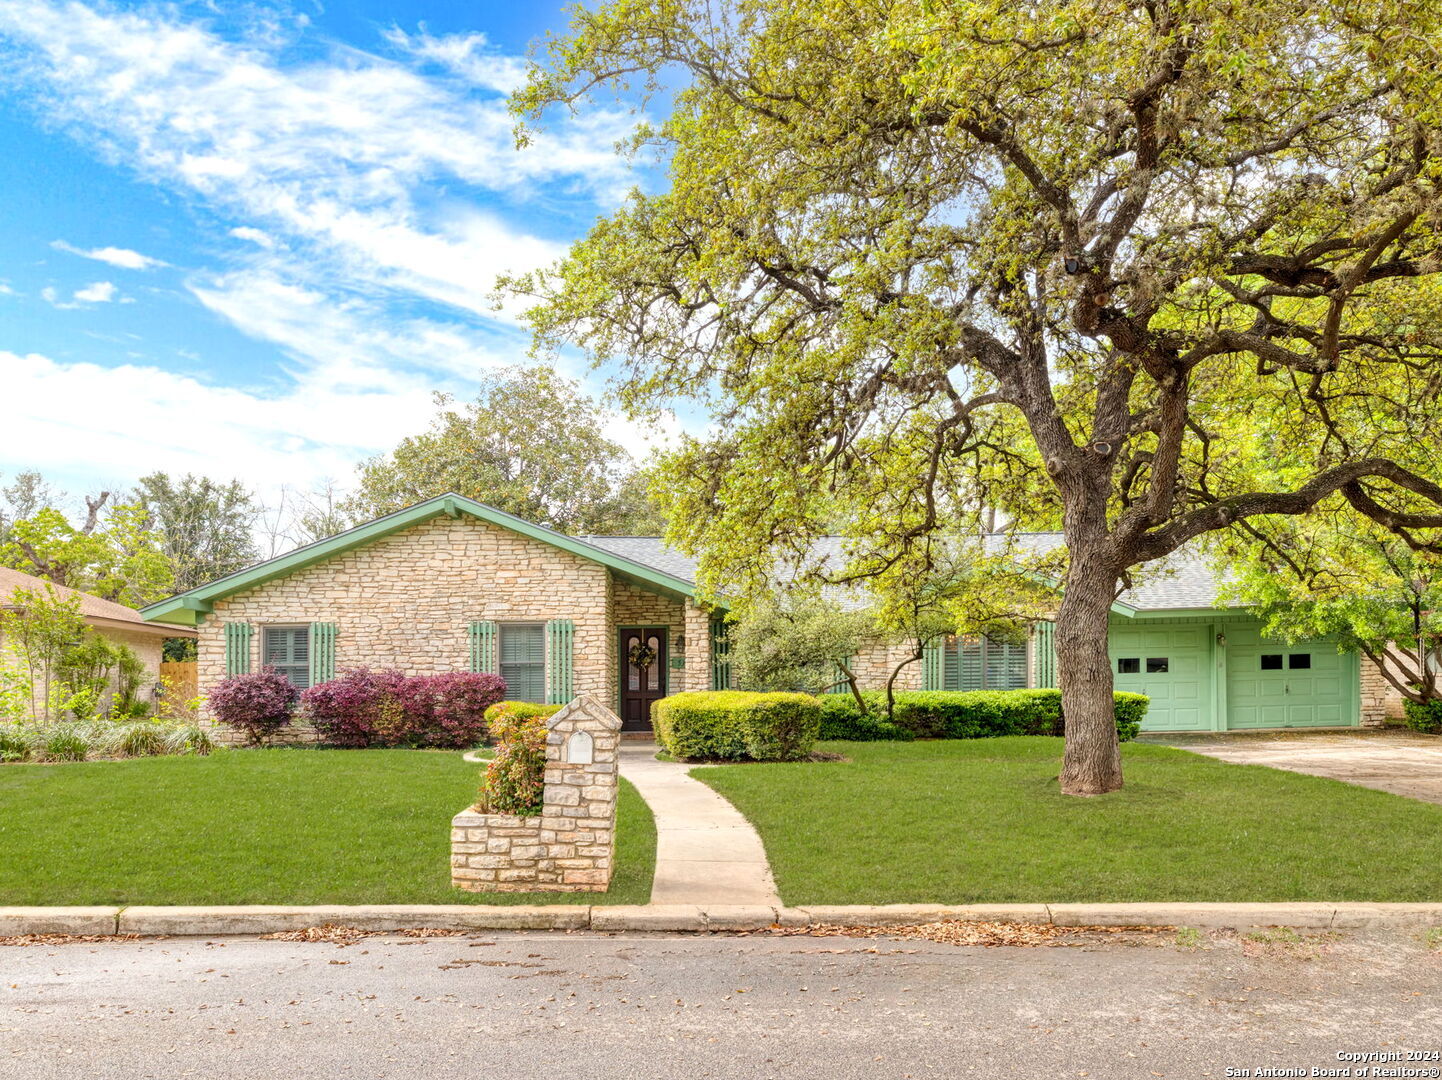 Photo of 534 Balfour Dr in Windcrest, TX